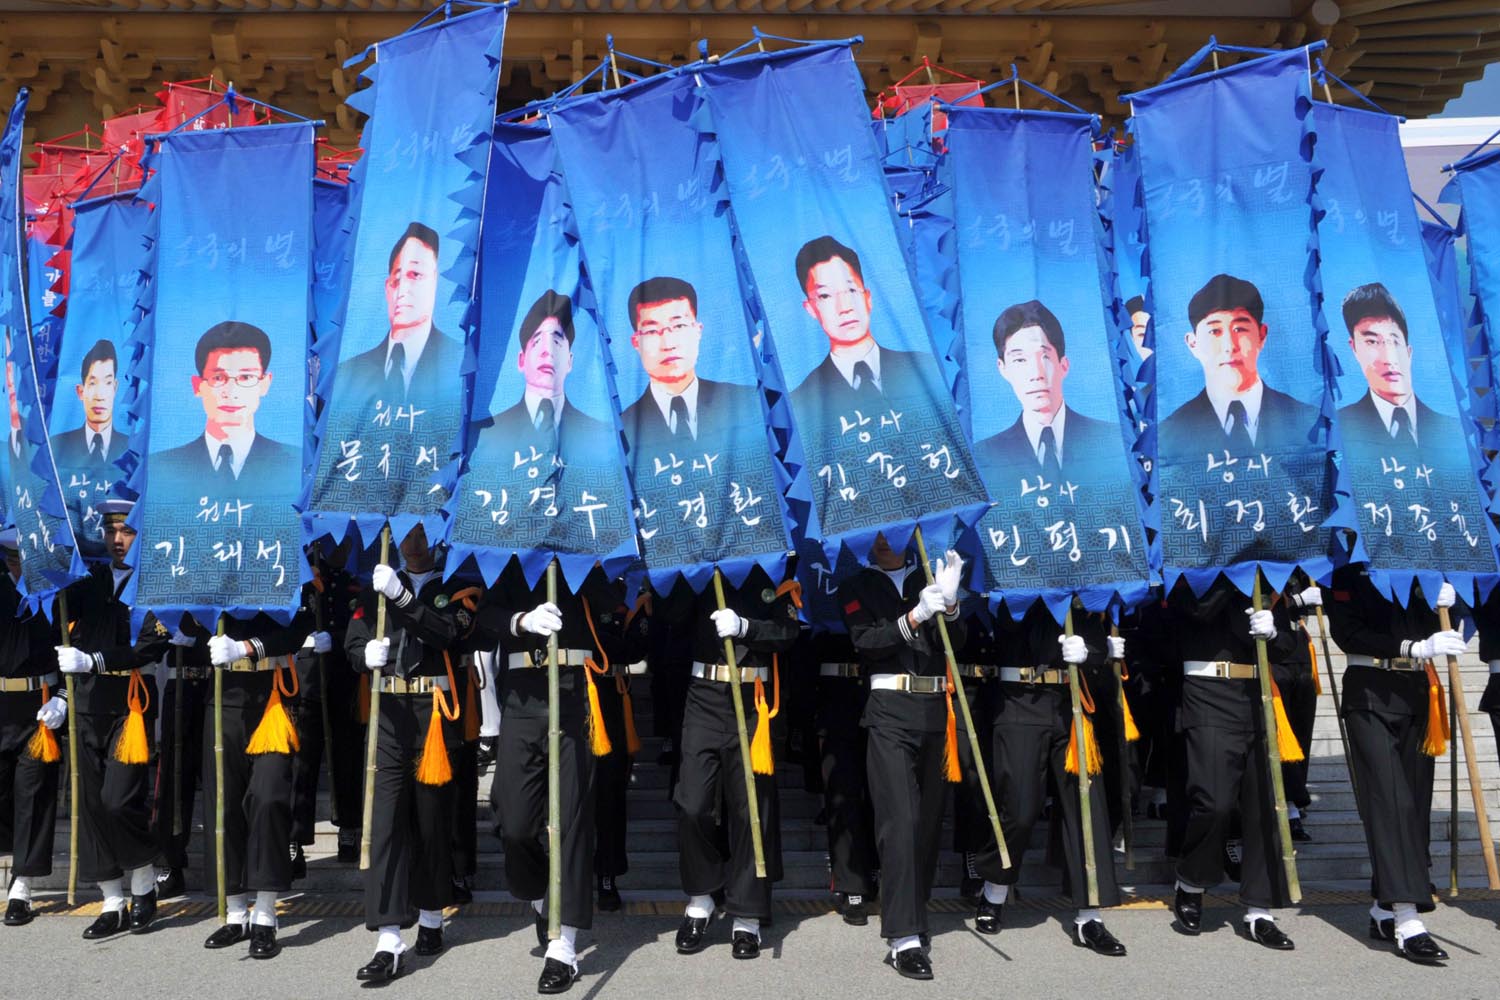 March 26, 2013. South Korean honour guards hold banners with pictures of the sailors who died in the sinking of a South Korean naval vessel by what Seoul insists was a North Korean submarine, during an event marking the third anniversary of the incident, at the national cemetery in Daejeon. Forty-six sailors died when the Cheonan corvette sunk.